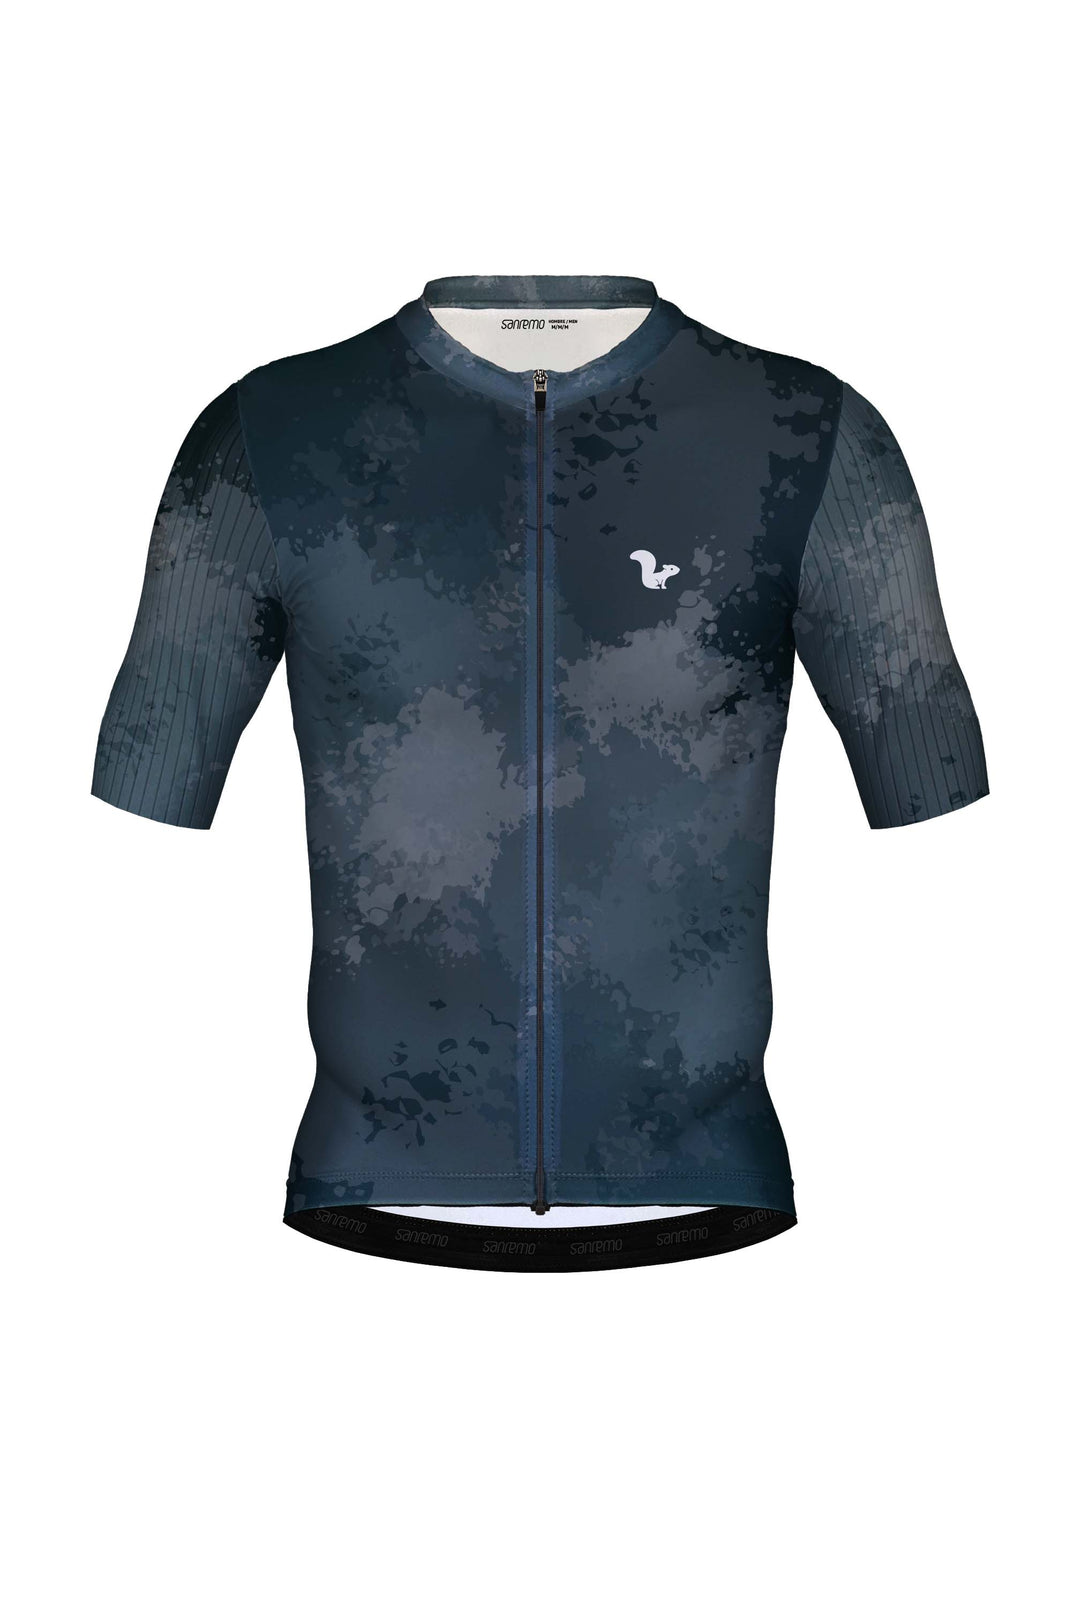 Jersey Corsa Forest- Hombre